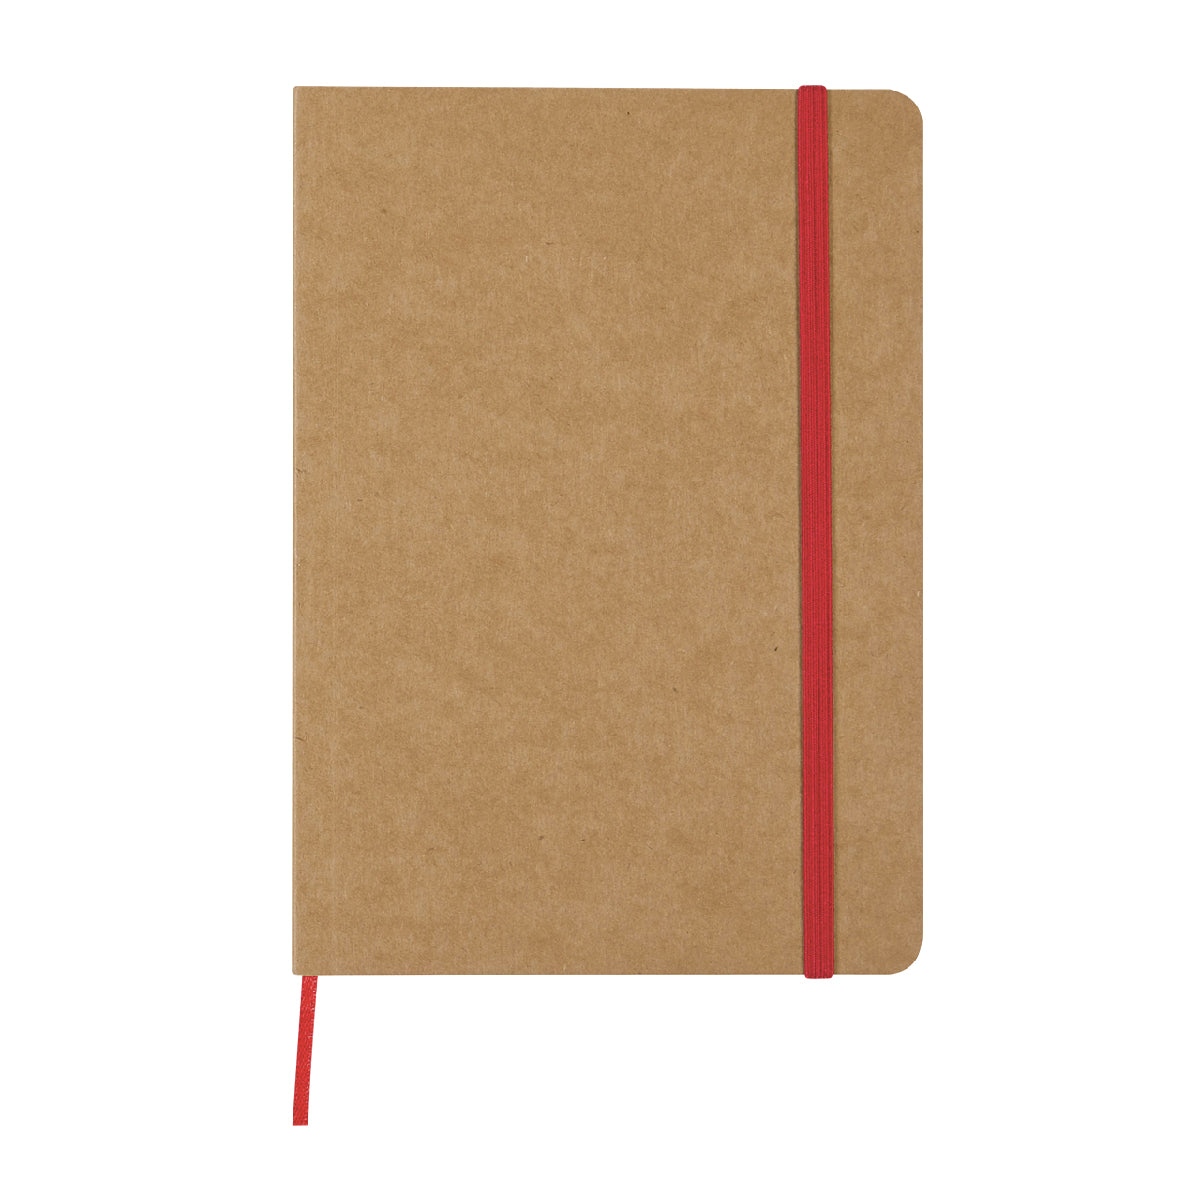 5" x 7" Eco-Inspired Strap Notebook